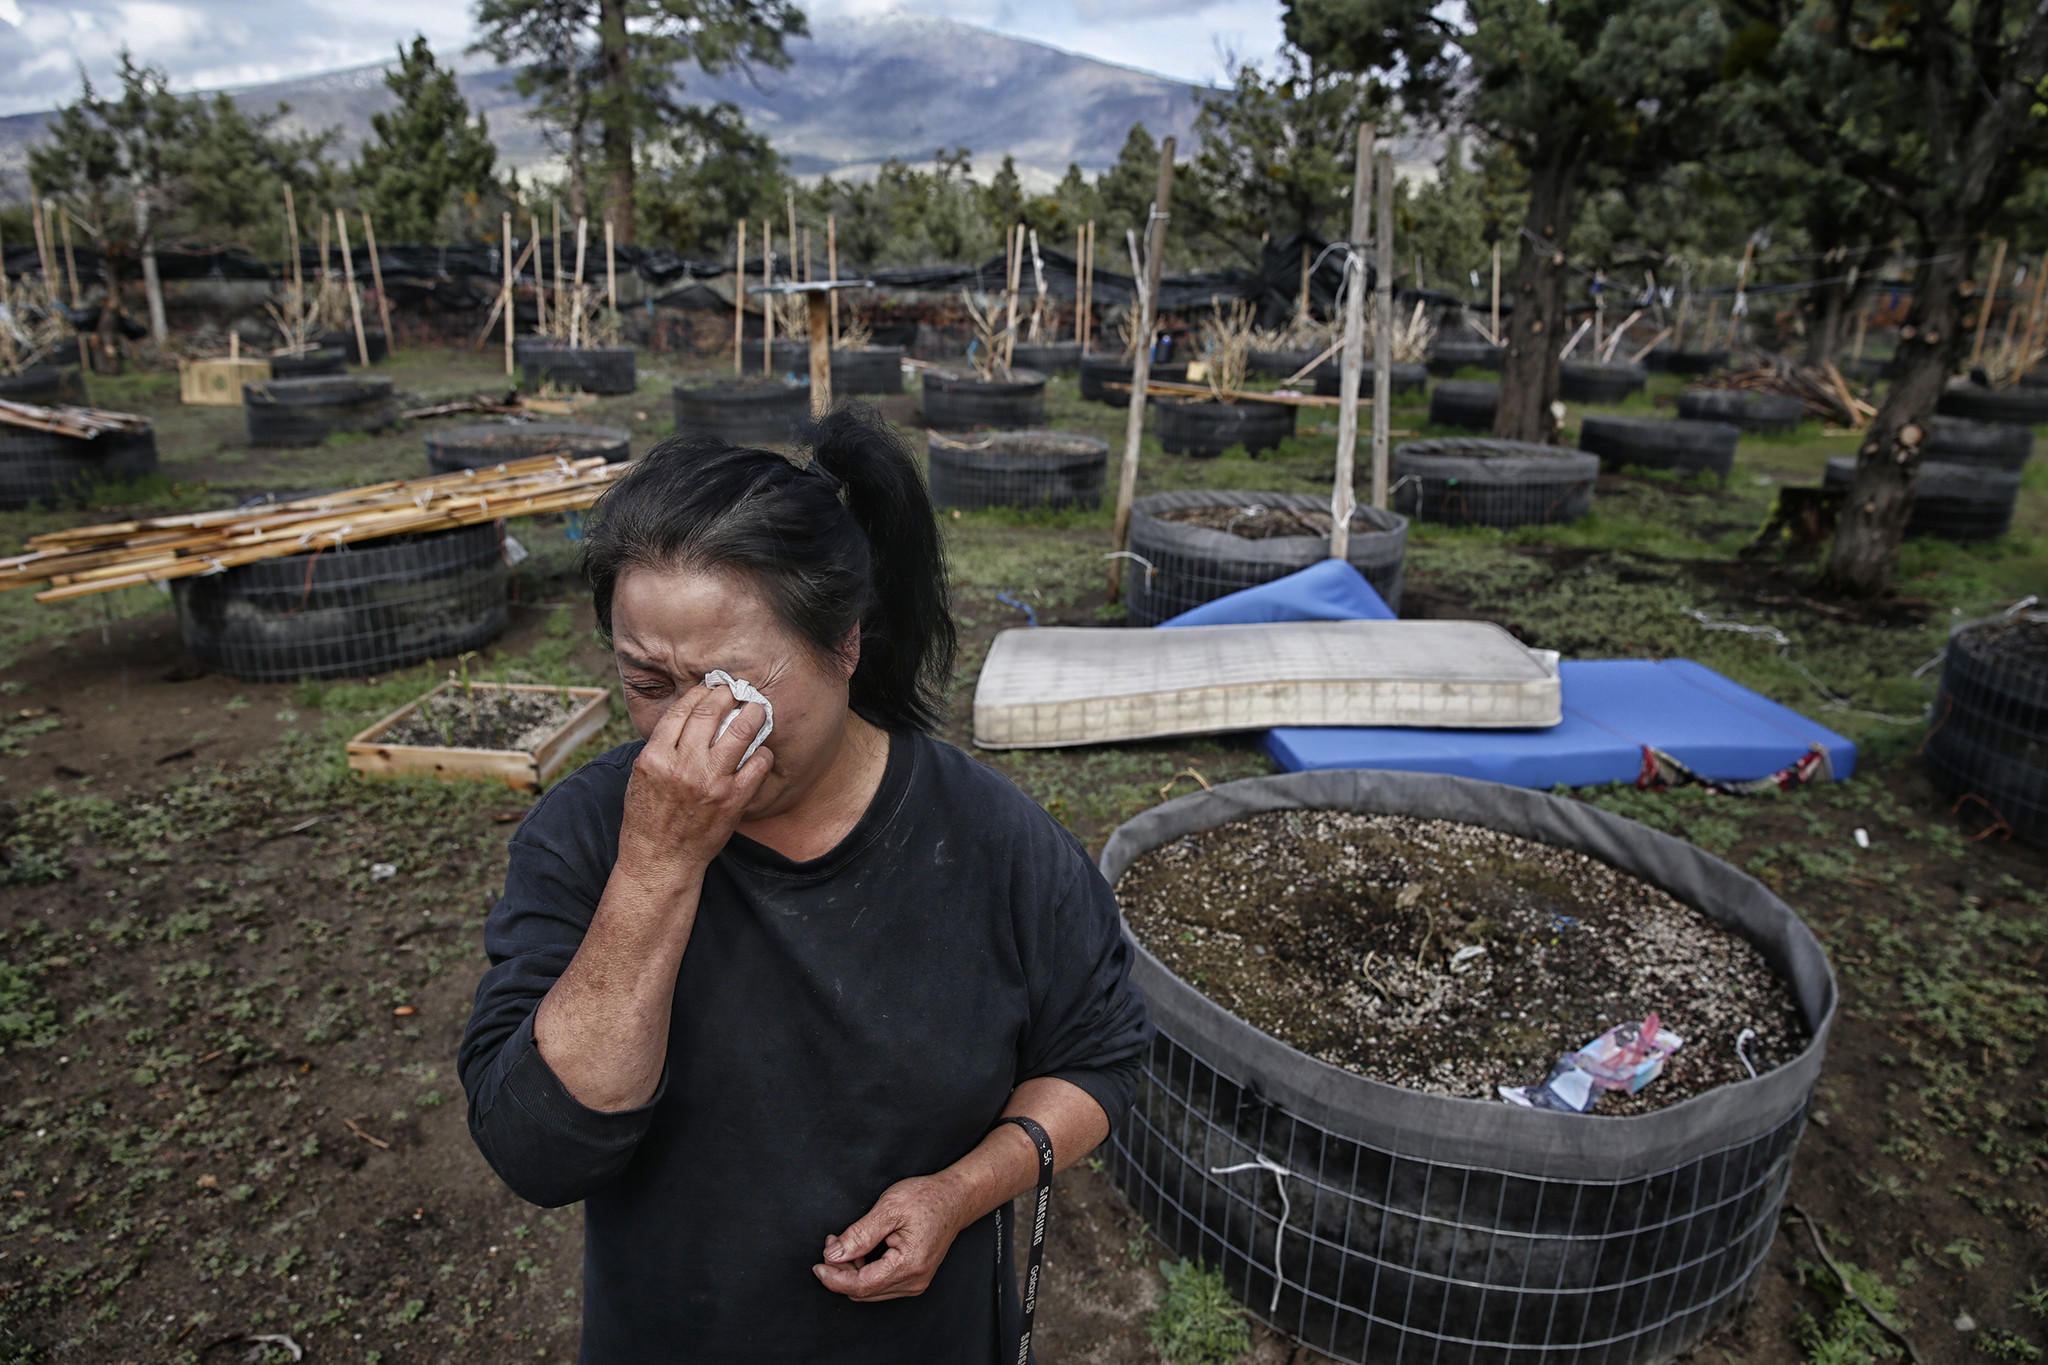 Bao Kelly Xiong weeps as she clears the belongings of her sister, Mee Xiong, from her Mt. Shasta Vista property.  Mee died of asphyxiation last winter when she used charcoal in a pot to heat a small enclosure she bedded down in at night.